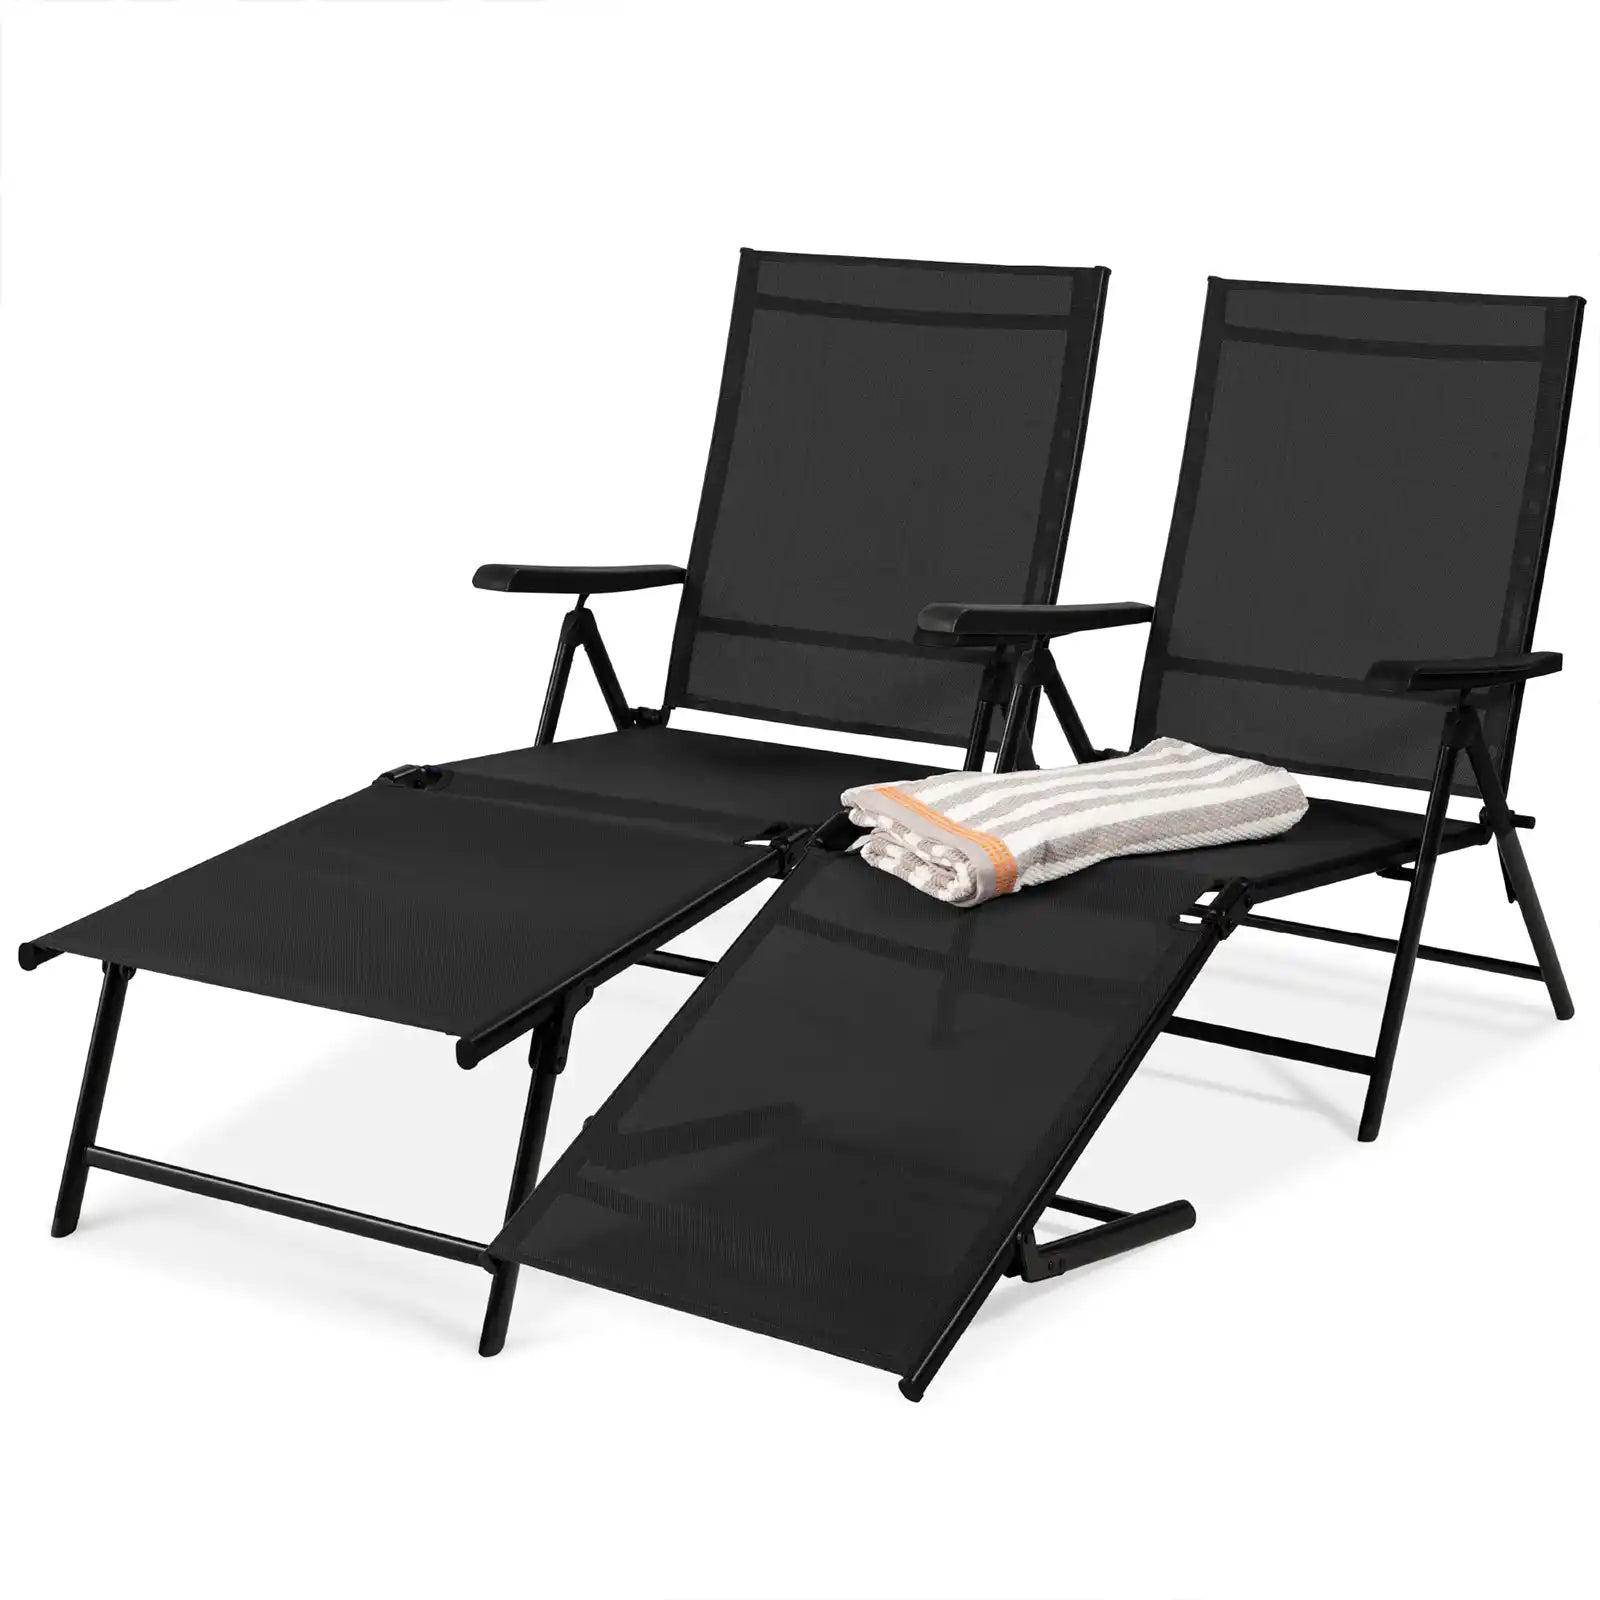 Outdoor Patio Chaise Lounge Chair Adjustable Folding Pool Lounger w/ Steel Frame, Set of 2